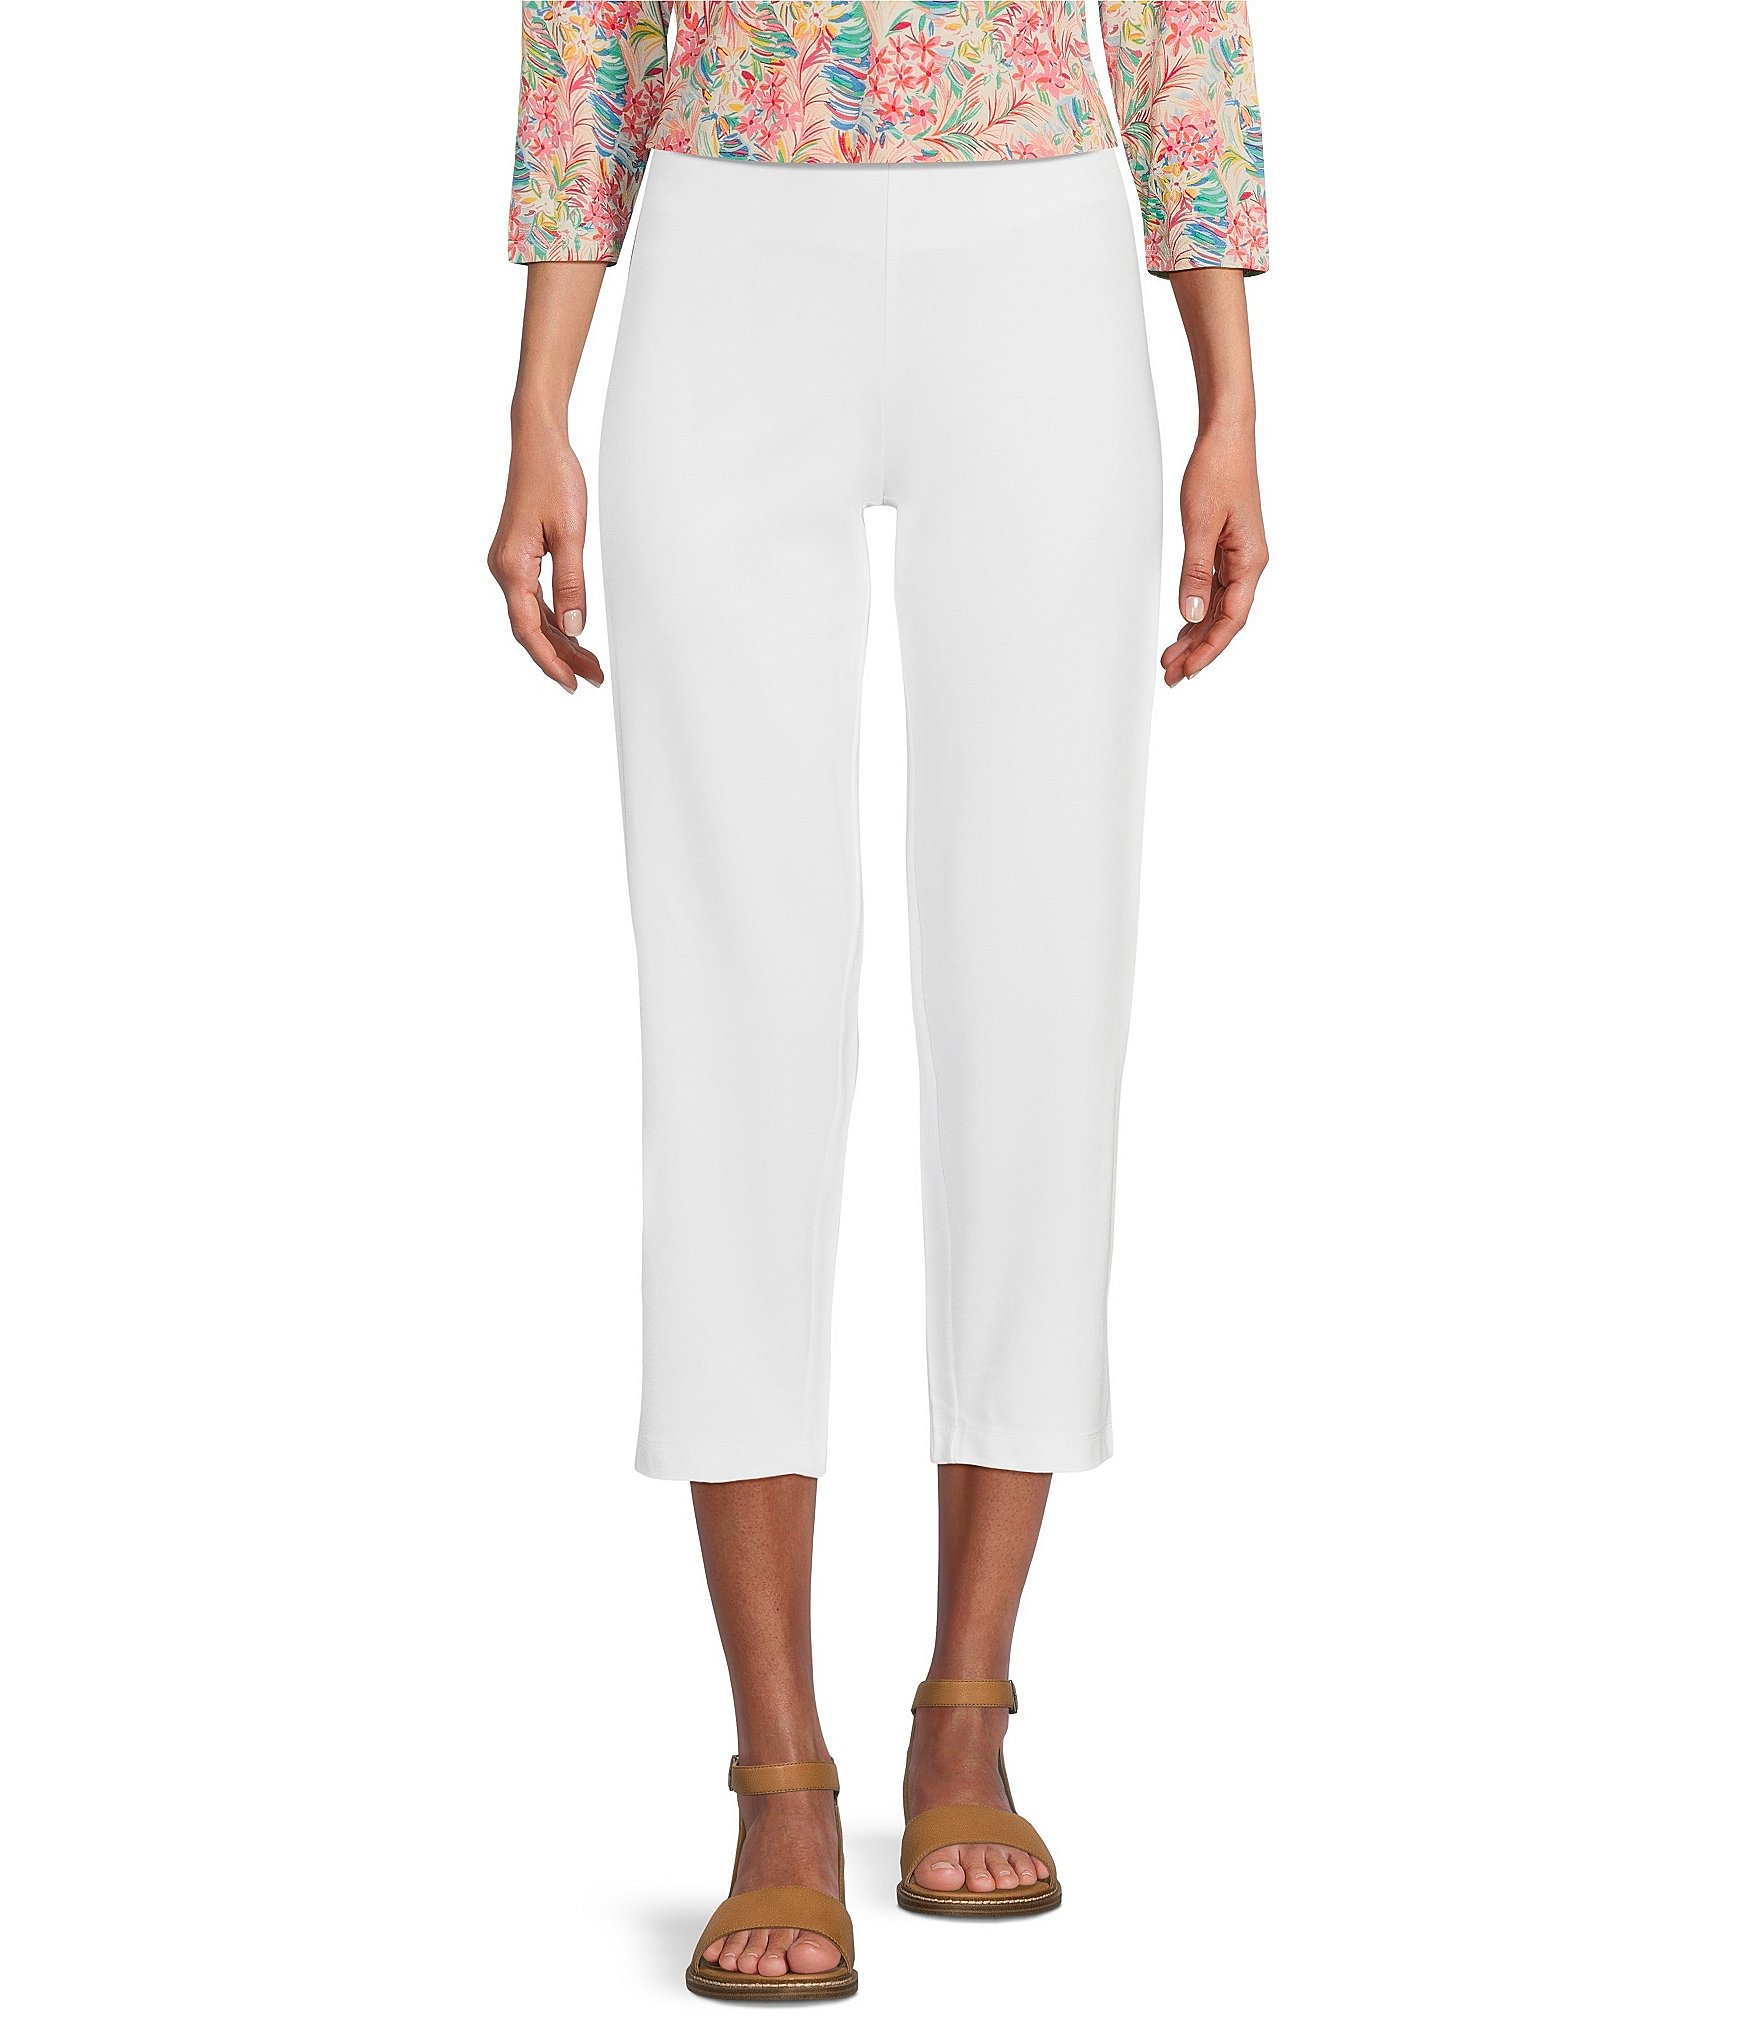 Laura Grey Cropped Straight Leg Pull On Stretch Pants - M/L Petite